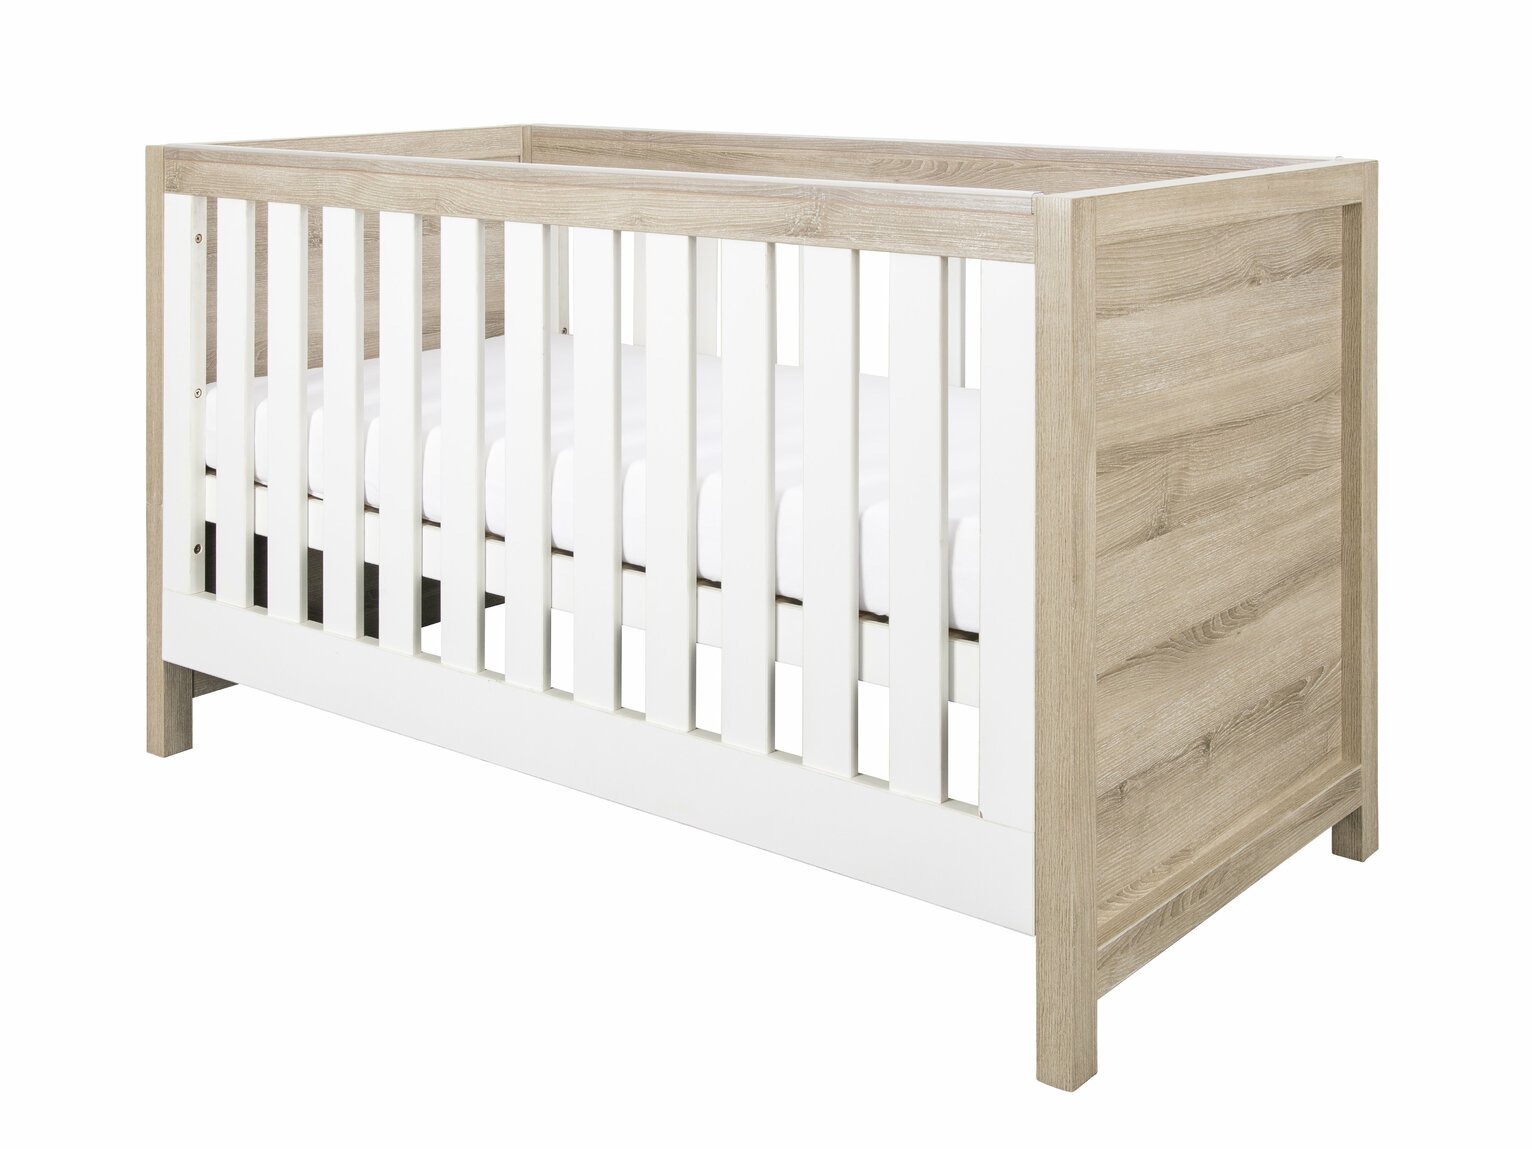 Modena Baby Cot Bed Review